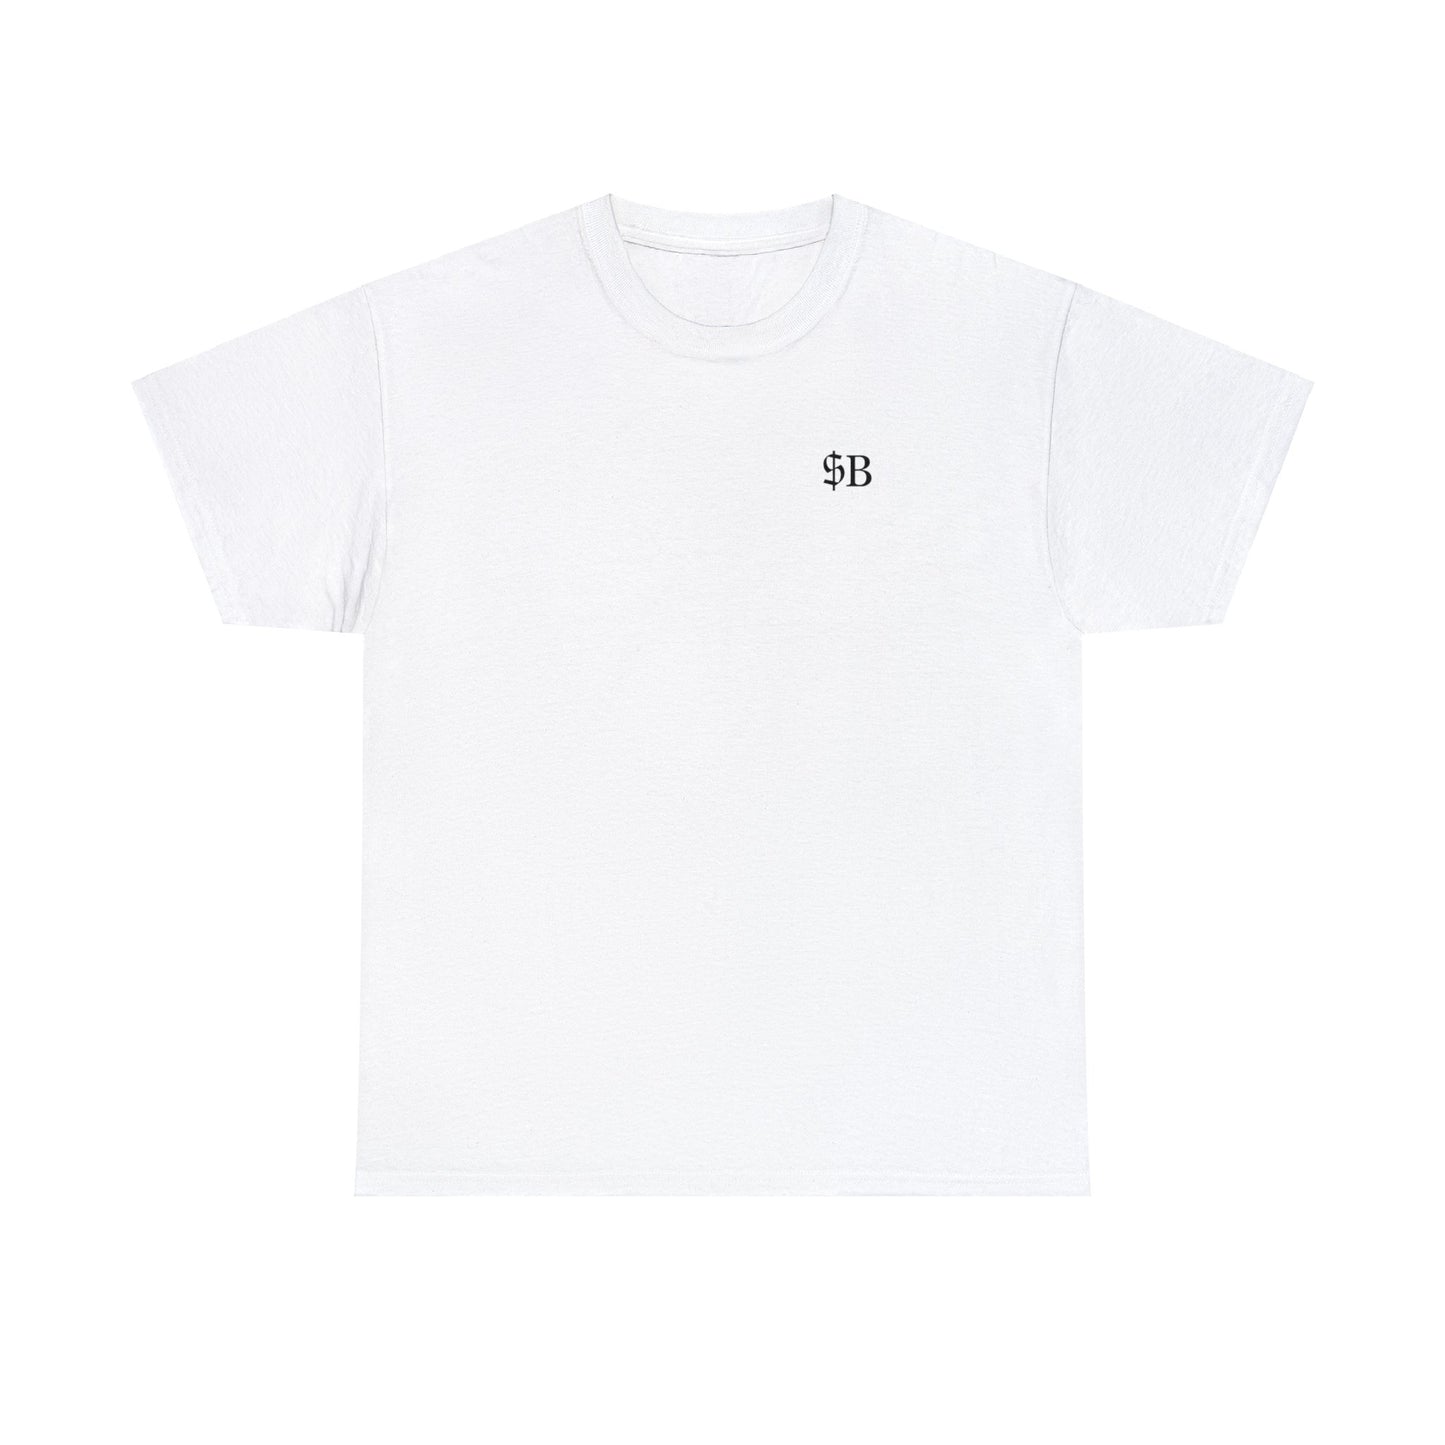 SuicideBoys 7th or St. Tammany Album Cover T-shirt